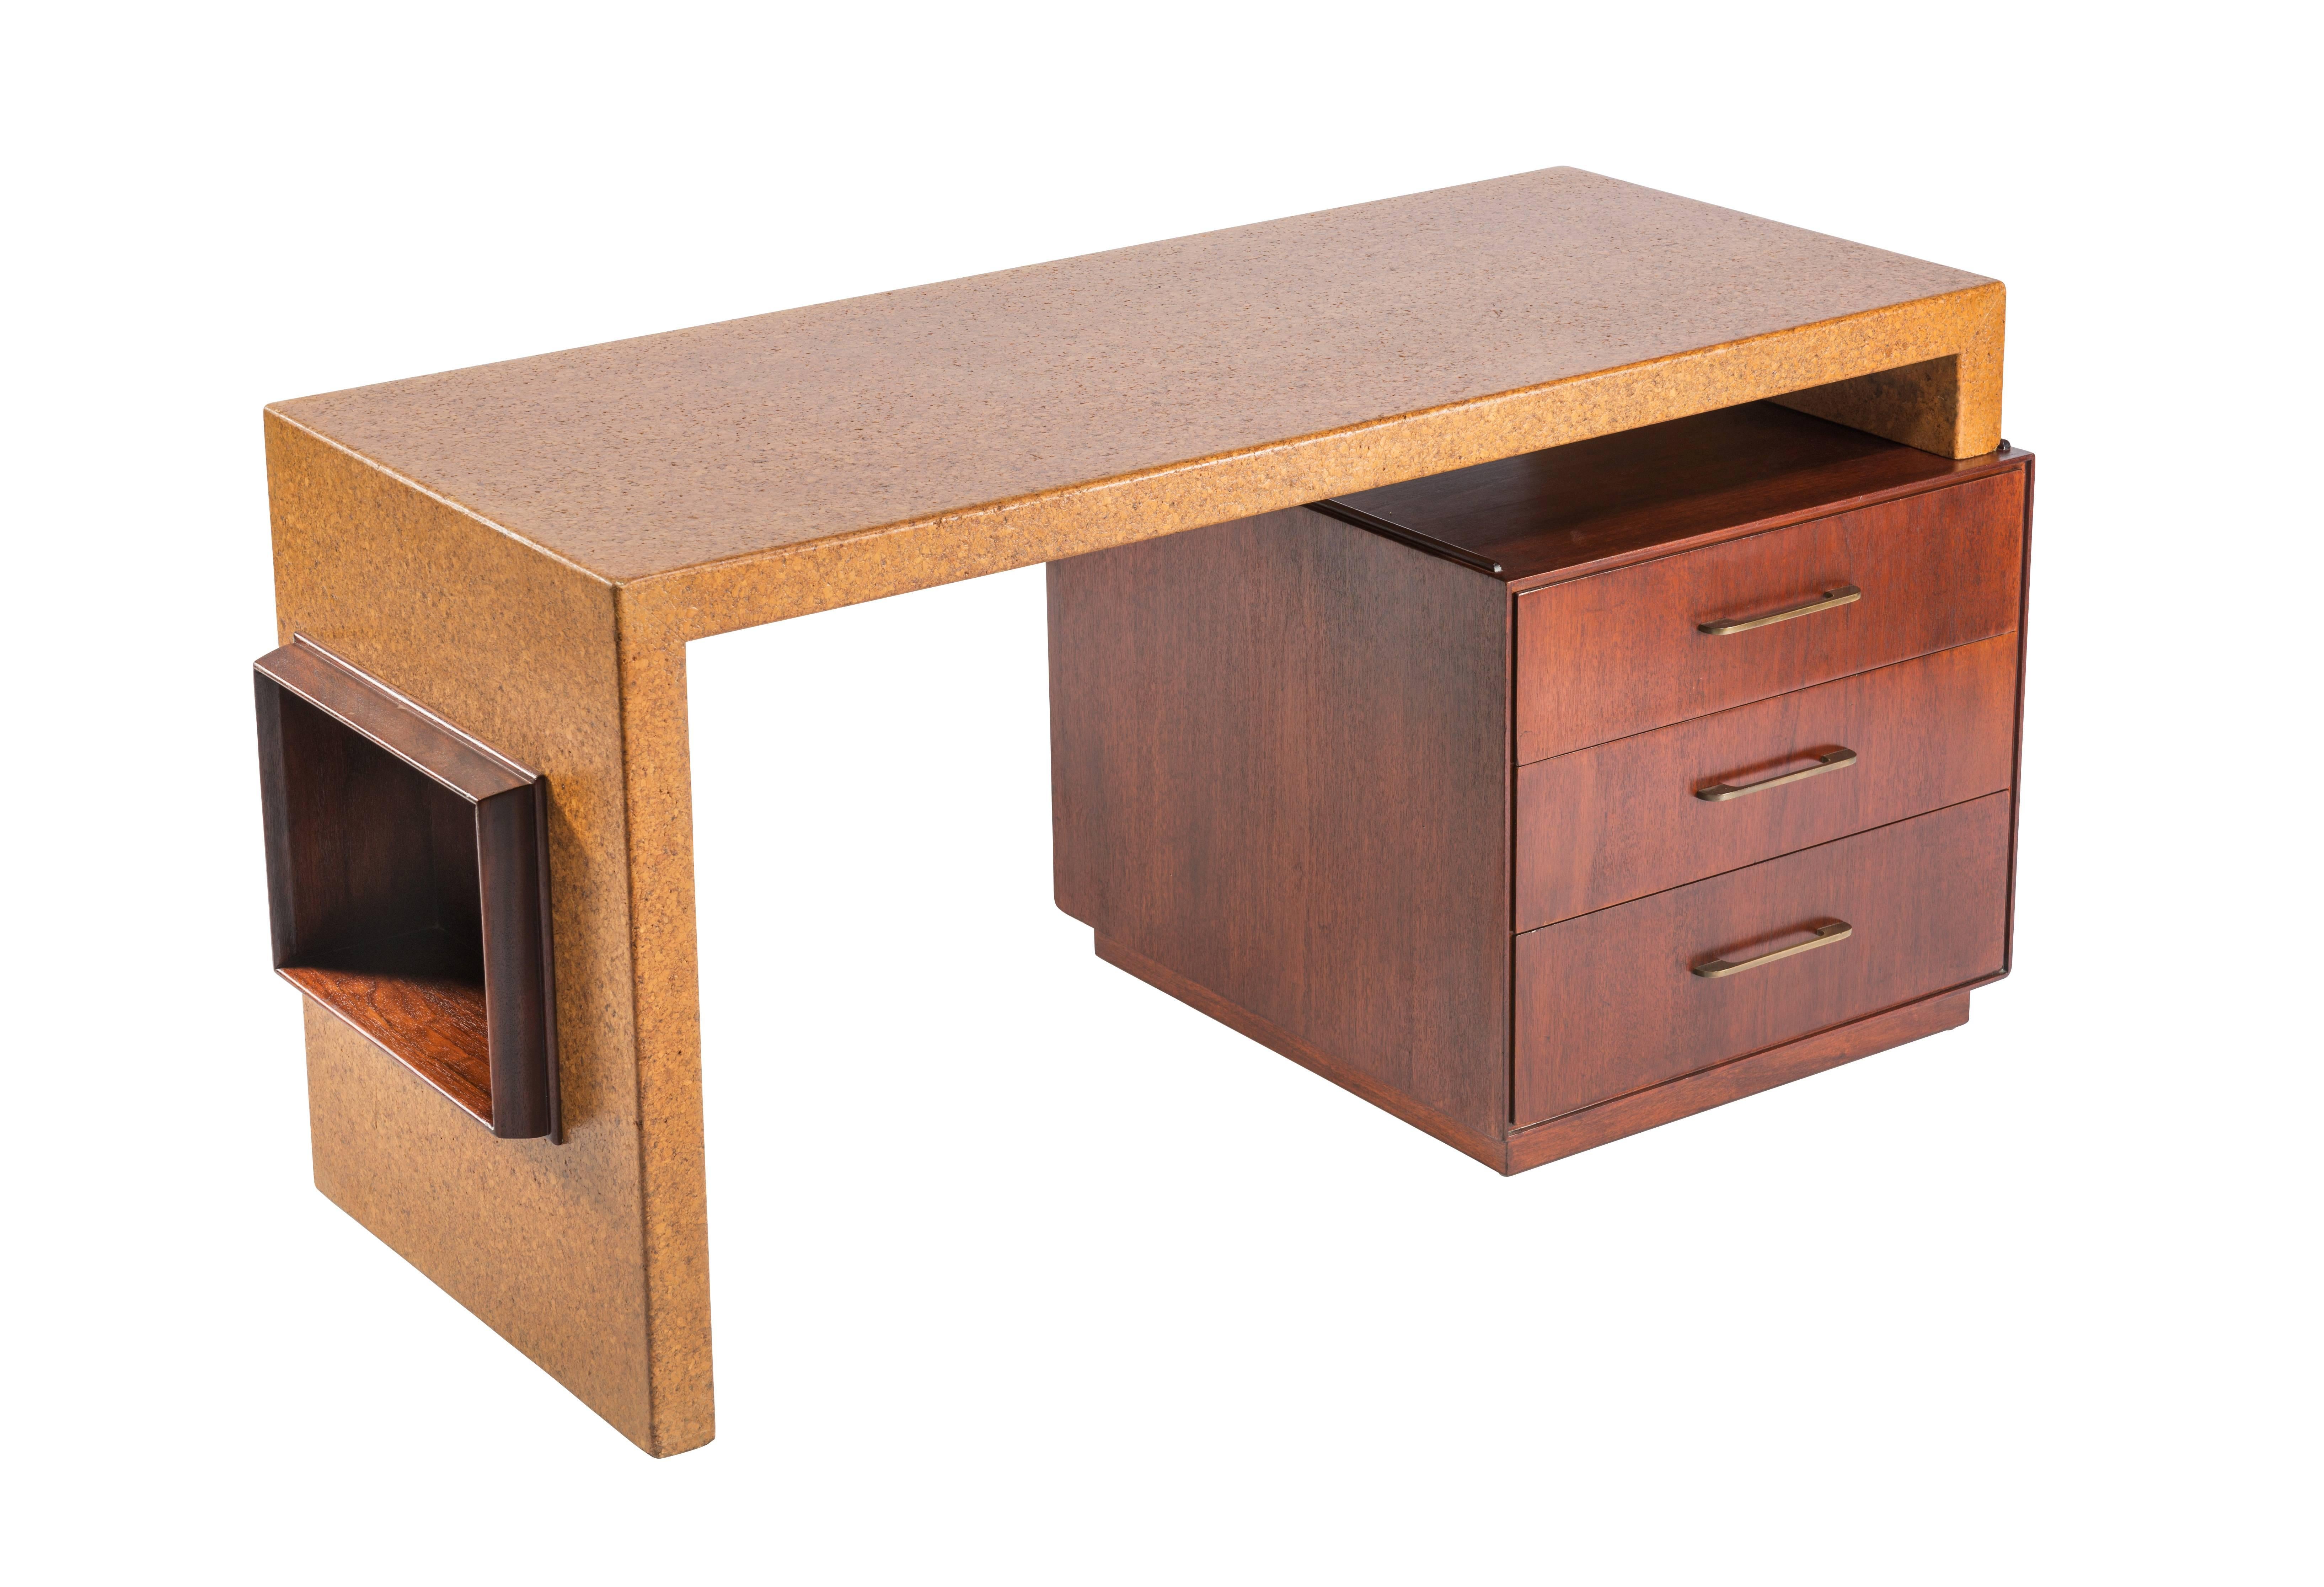 This rare desk is in two pieces and was designed to allow you to slide the top from one side to the other. This also allows you to configure a right or left handed desk. Designed by Paul Frankl for Johnson Furniture.

Length can range from 58-78